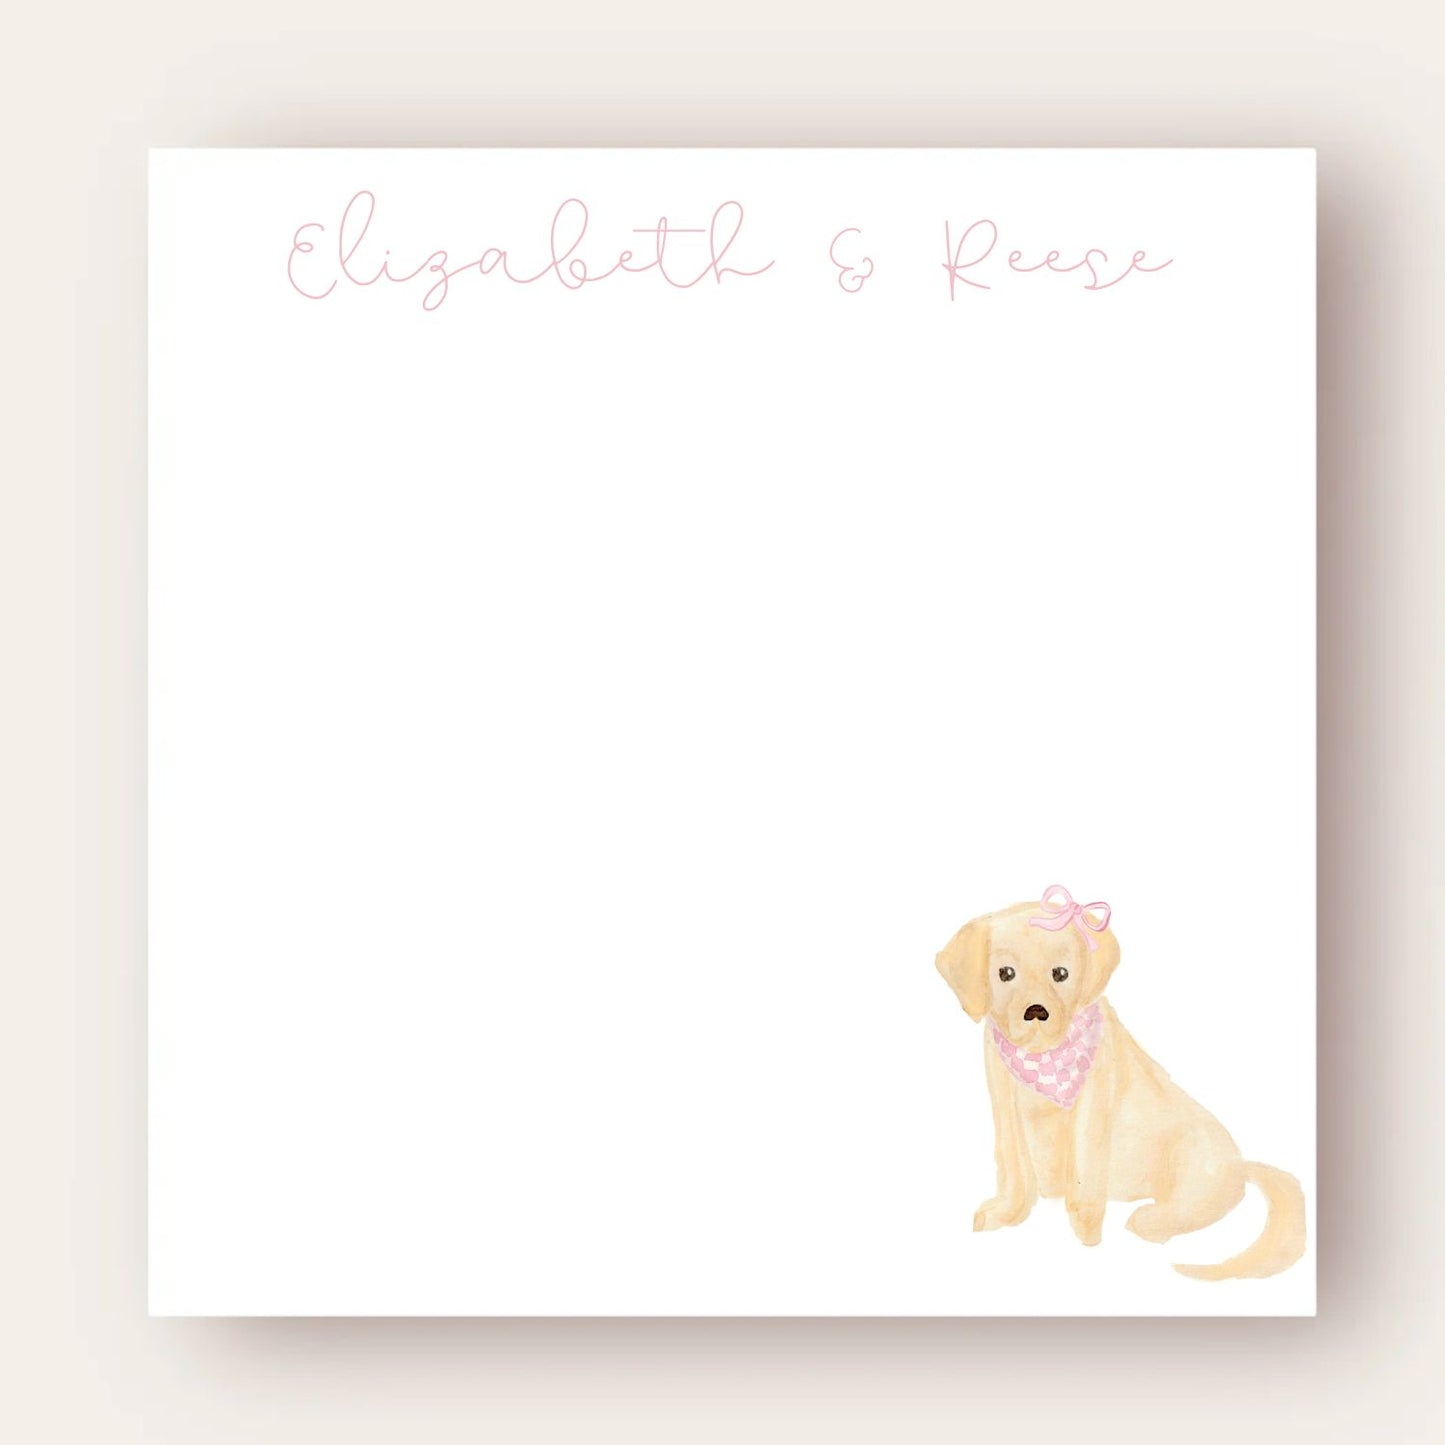 Cute Golden or Yellow Lab Puppy Big Chunky Notepad